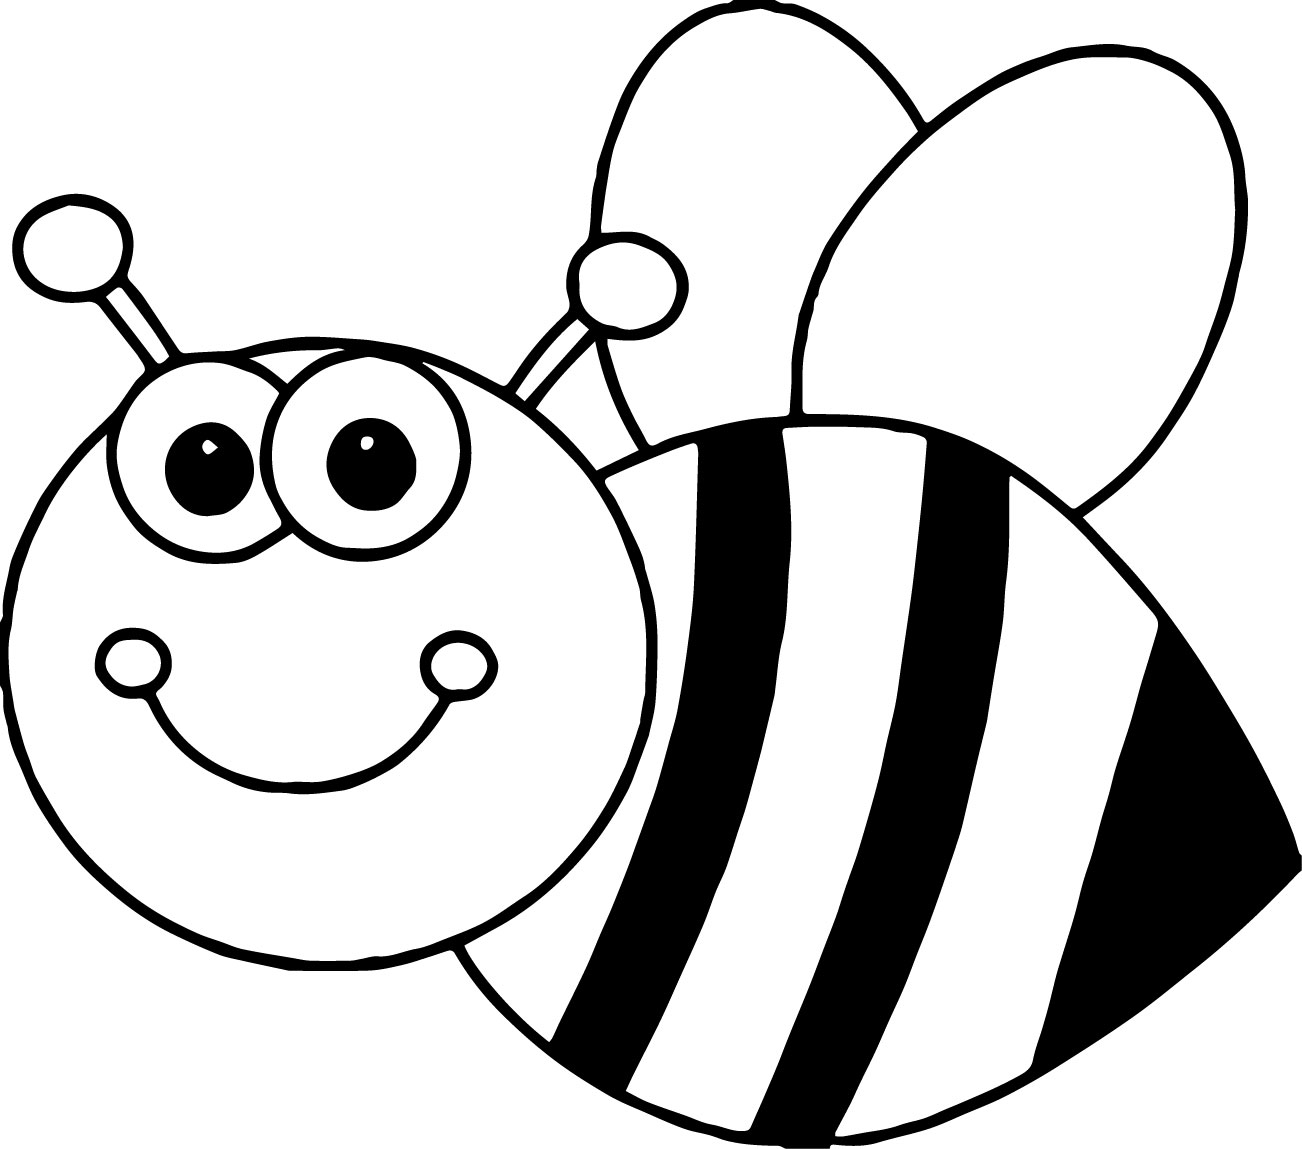 774 Animal Bee Coloring Pages with disney character